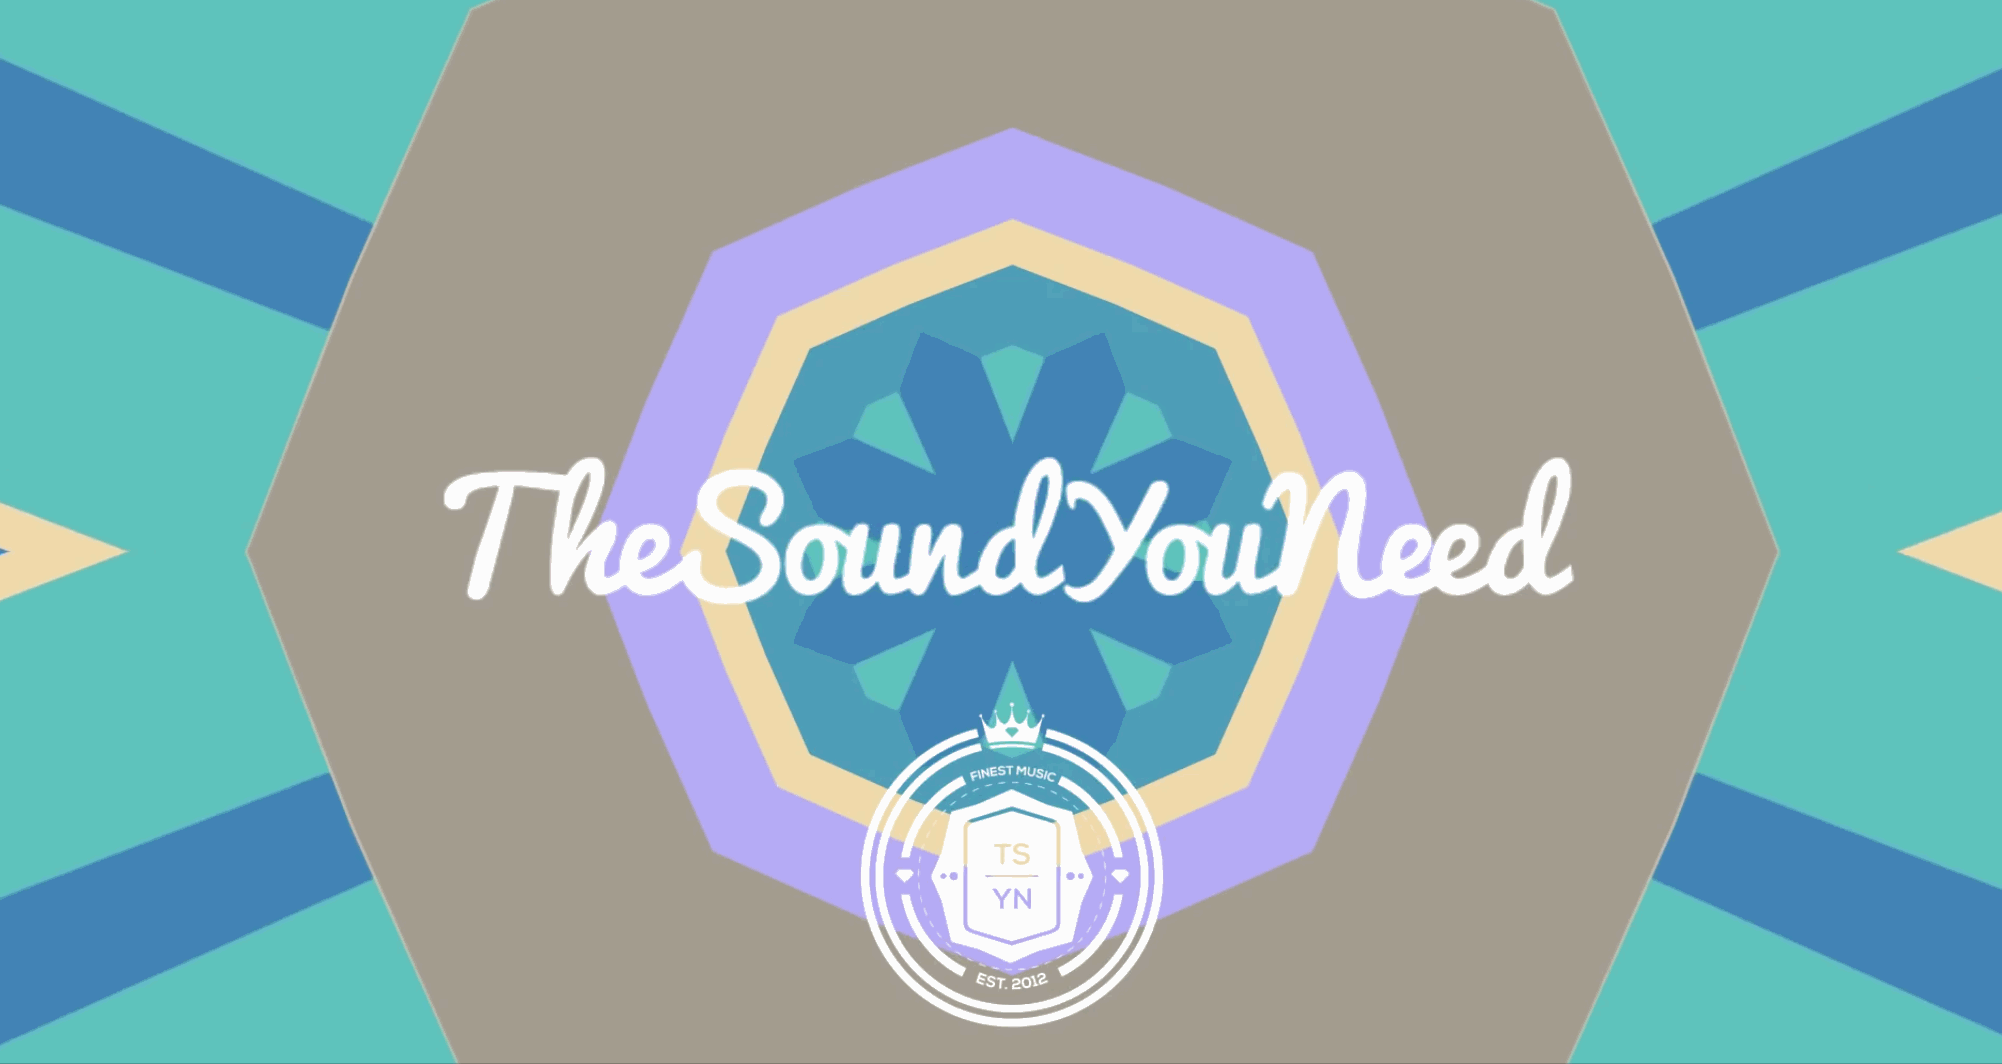 TheSoundYouNeed Video3 graphic